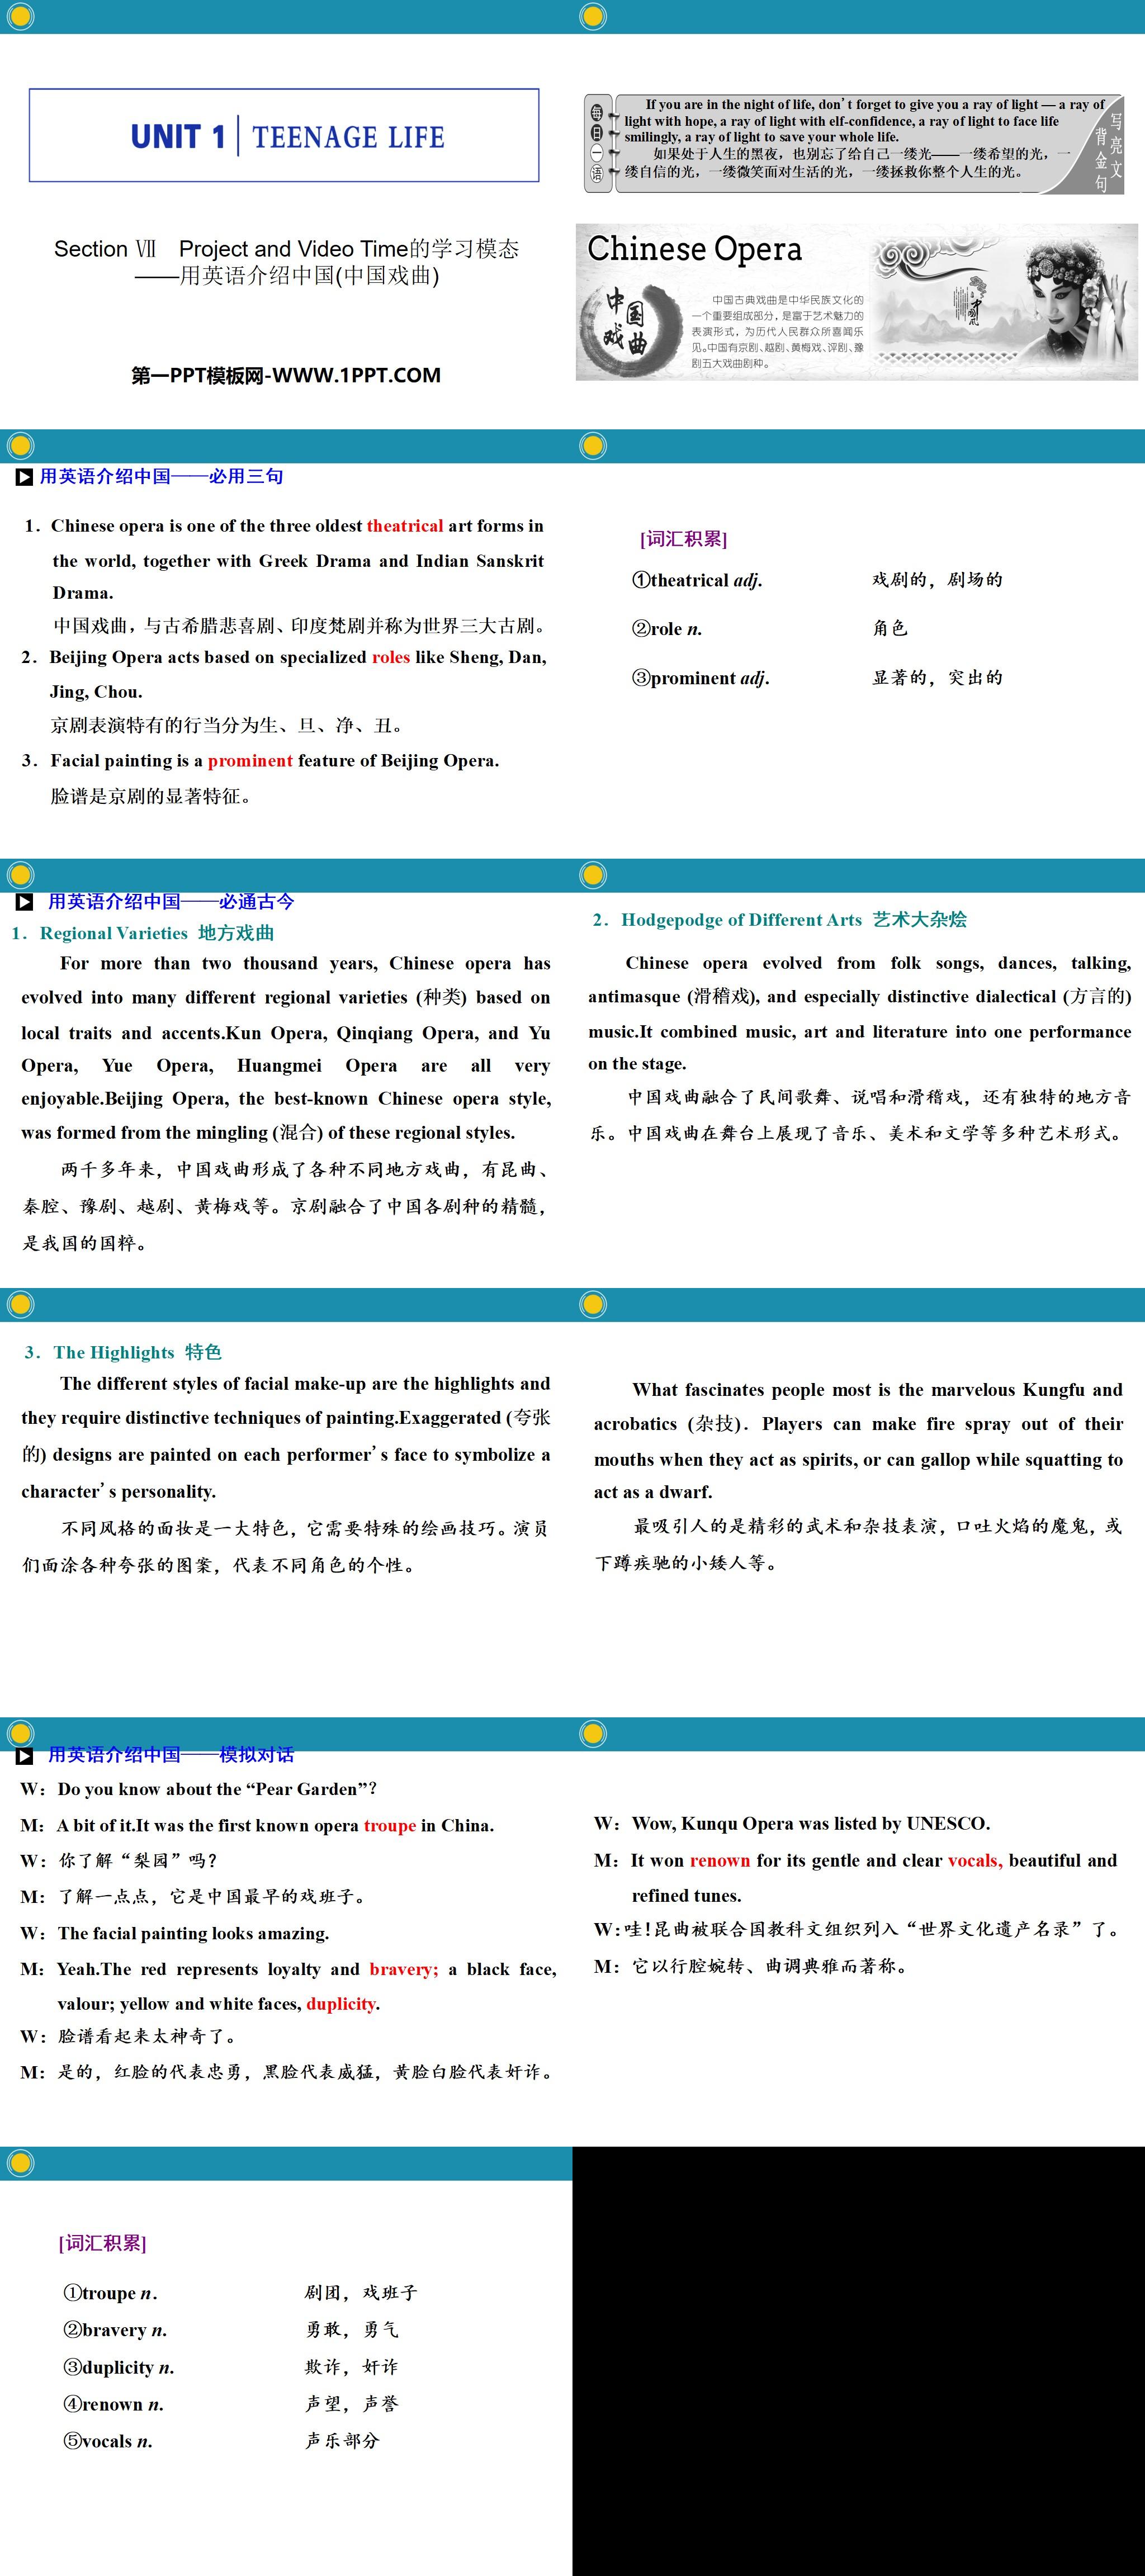 《Teenage Life》Project and Video Time的学习模态PPT
（2）